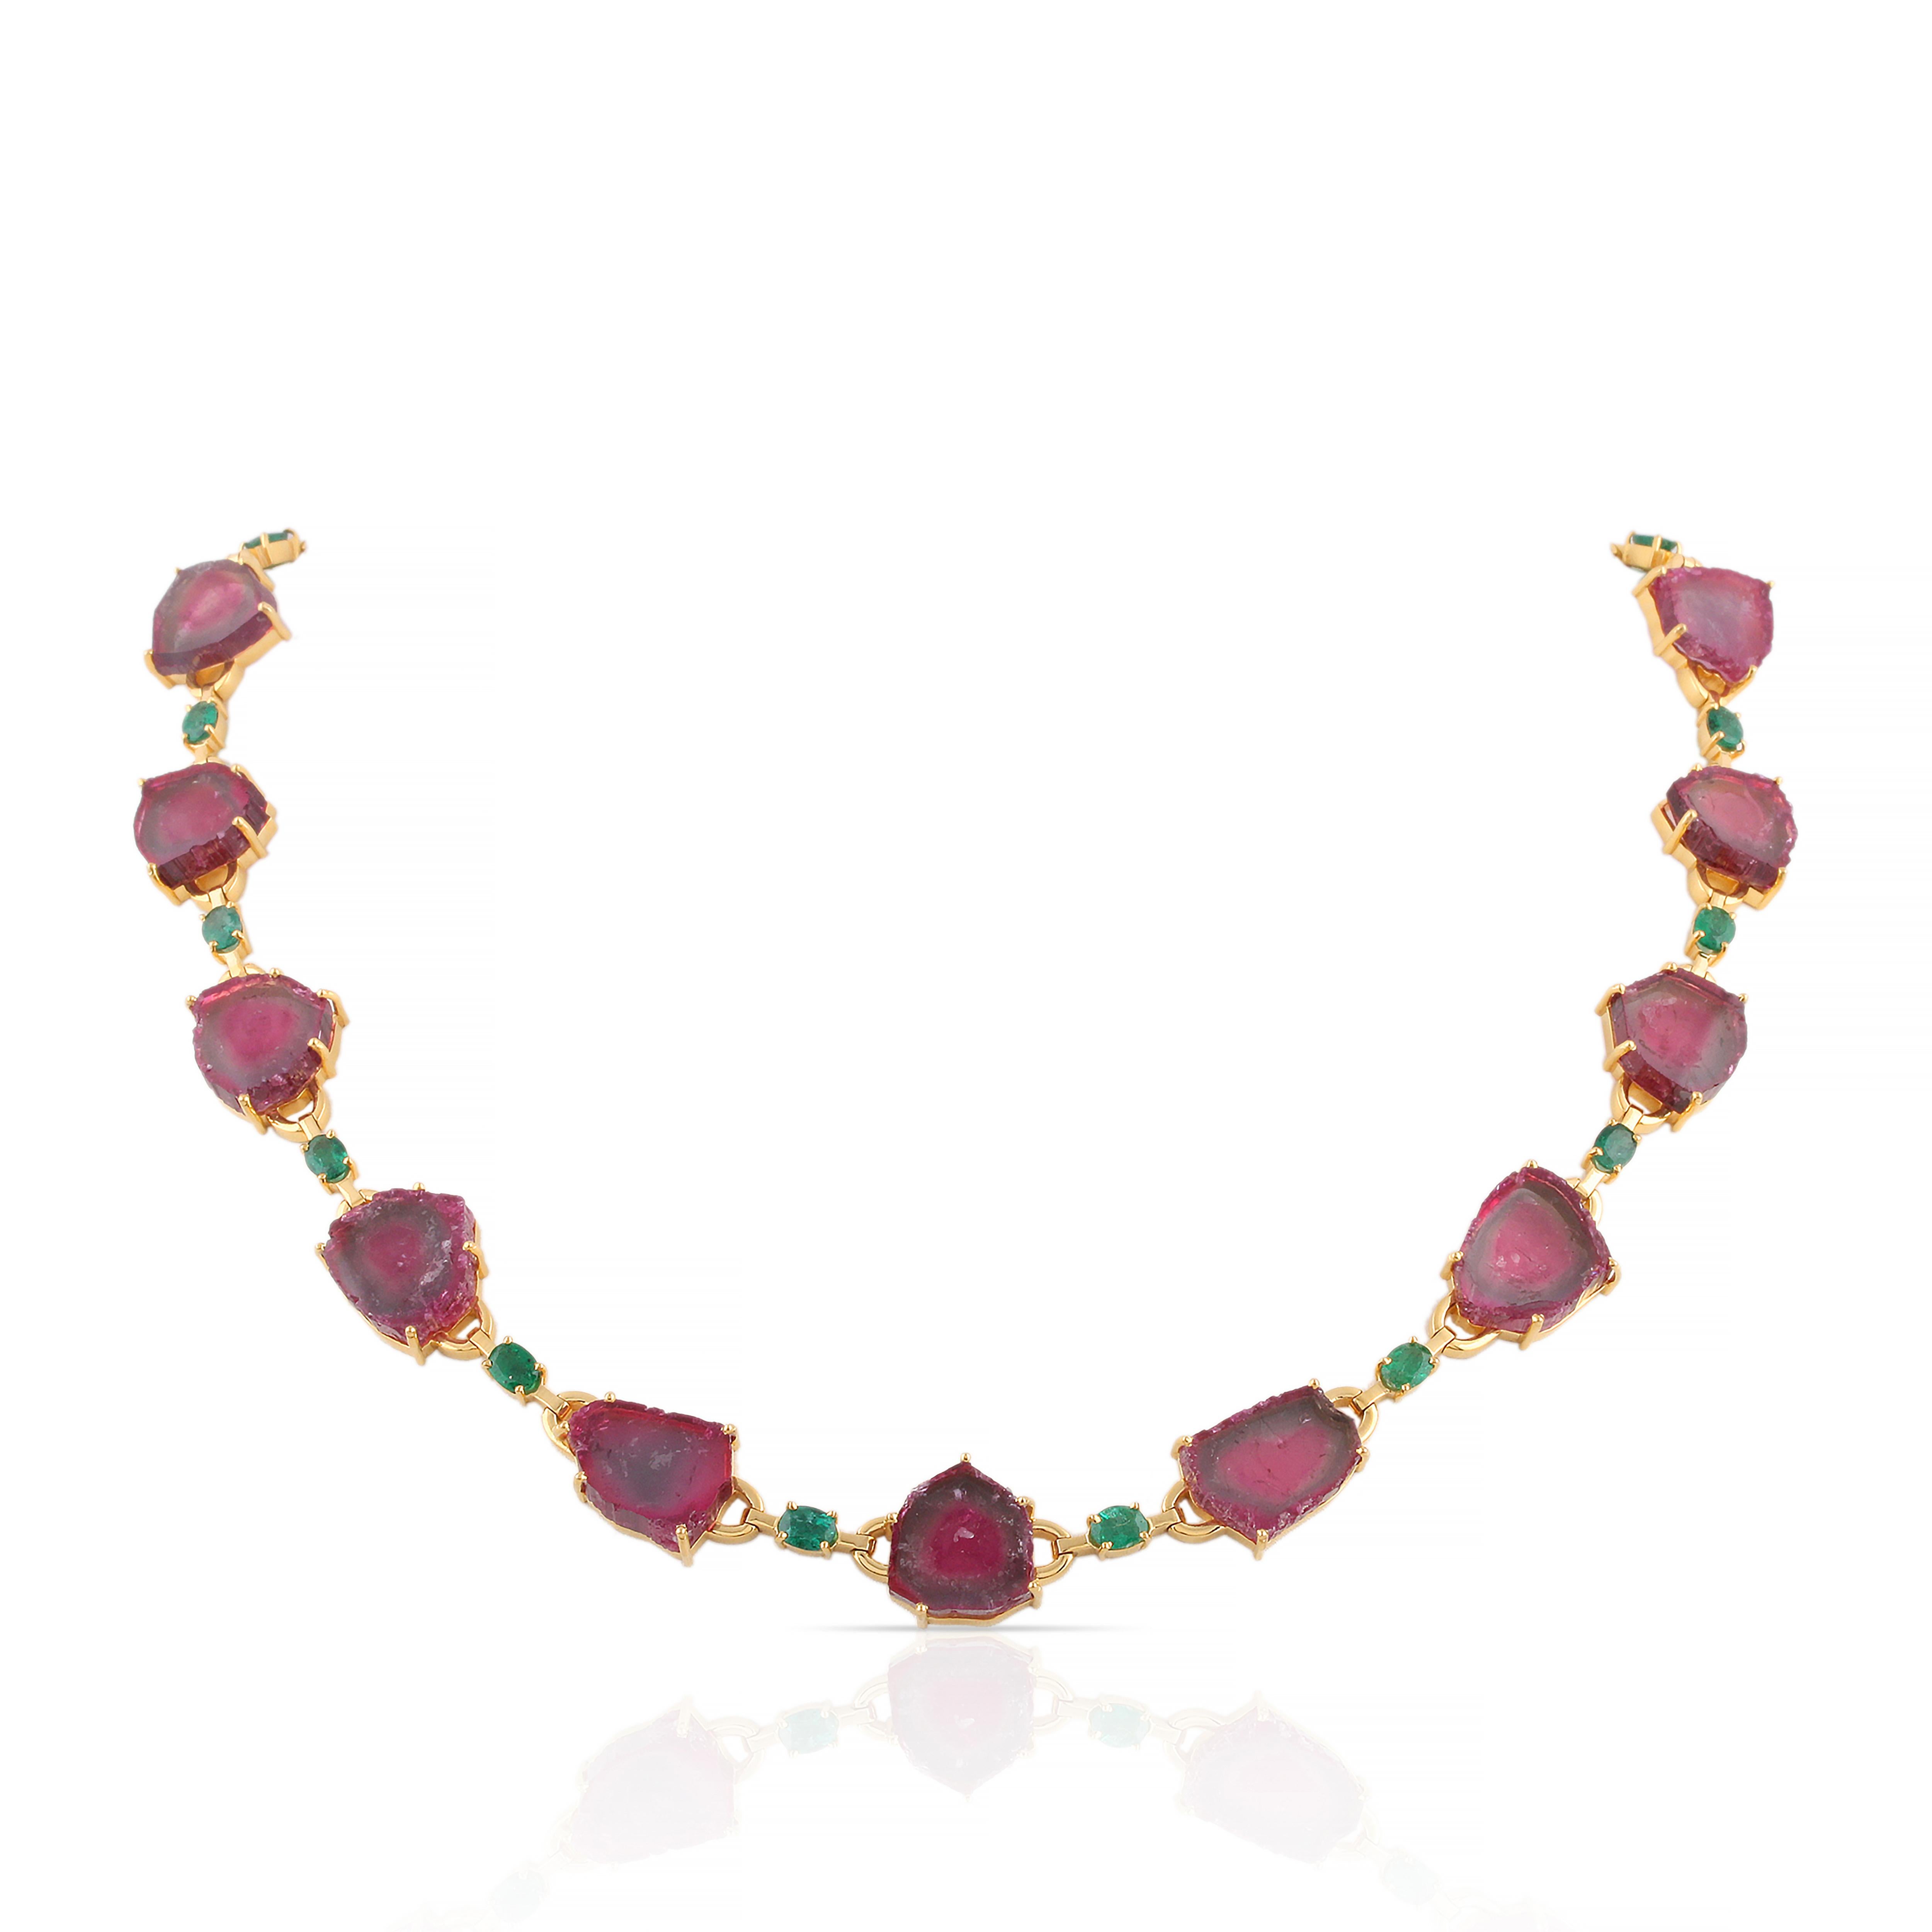 Tresor Beautiful Necklace features 103.90 carats of Gemstone. The Necklace are an ode to the luxurious yet classic beauty with sparkly gemstones and feminine hues. Their contemporary and modern design make them versatile in their use. The Necklace